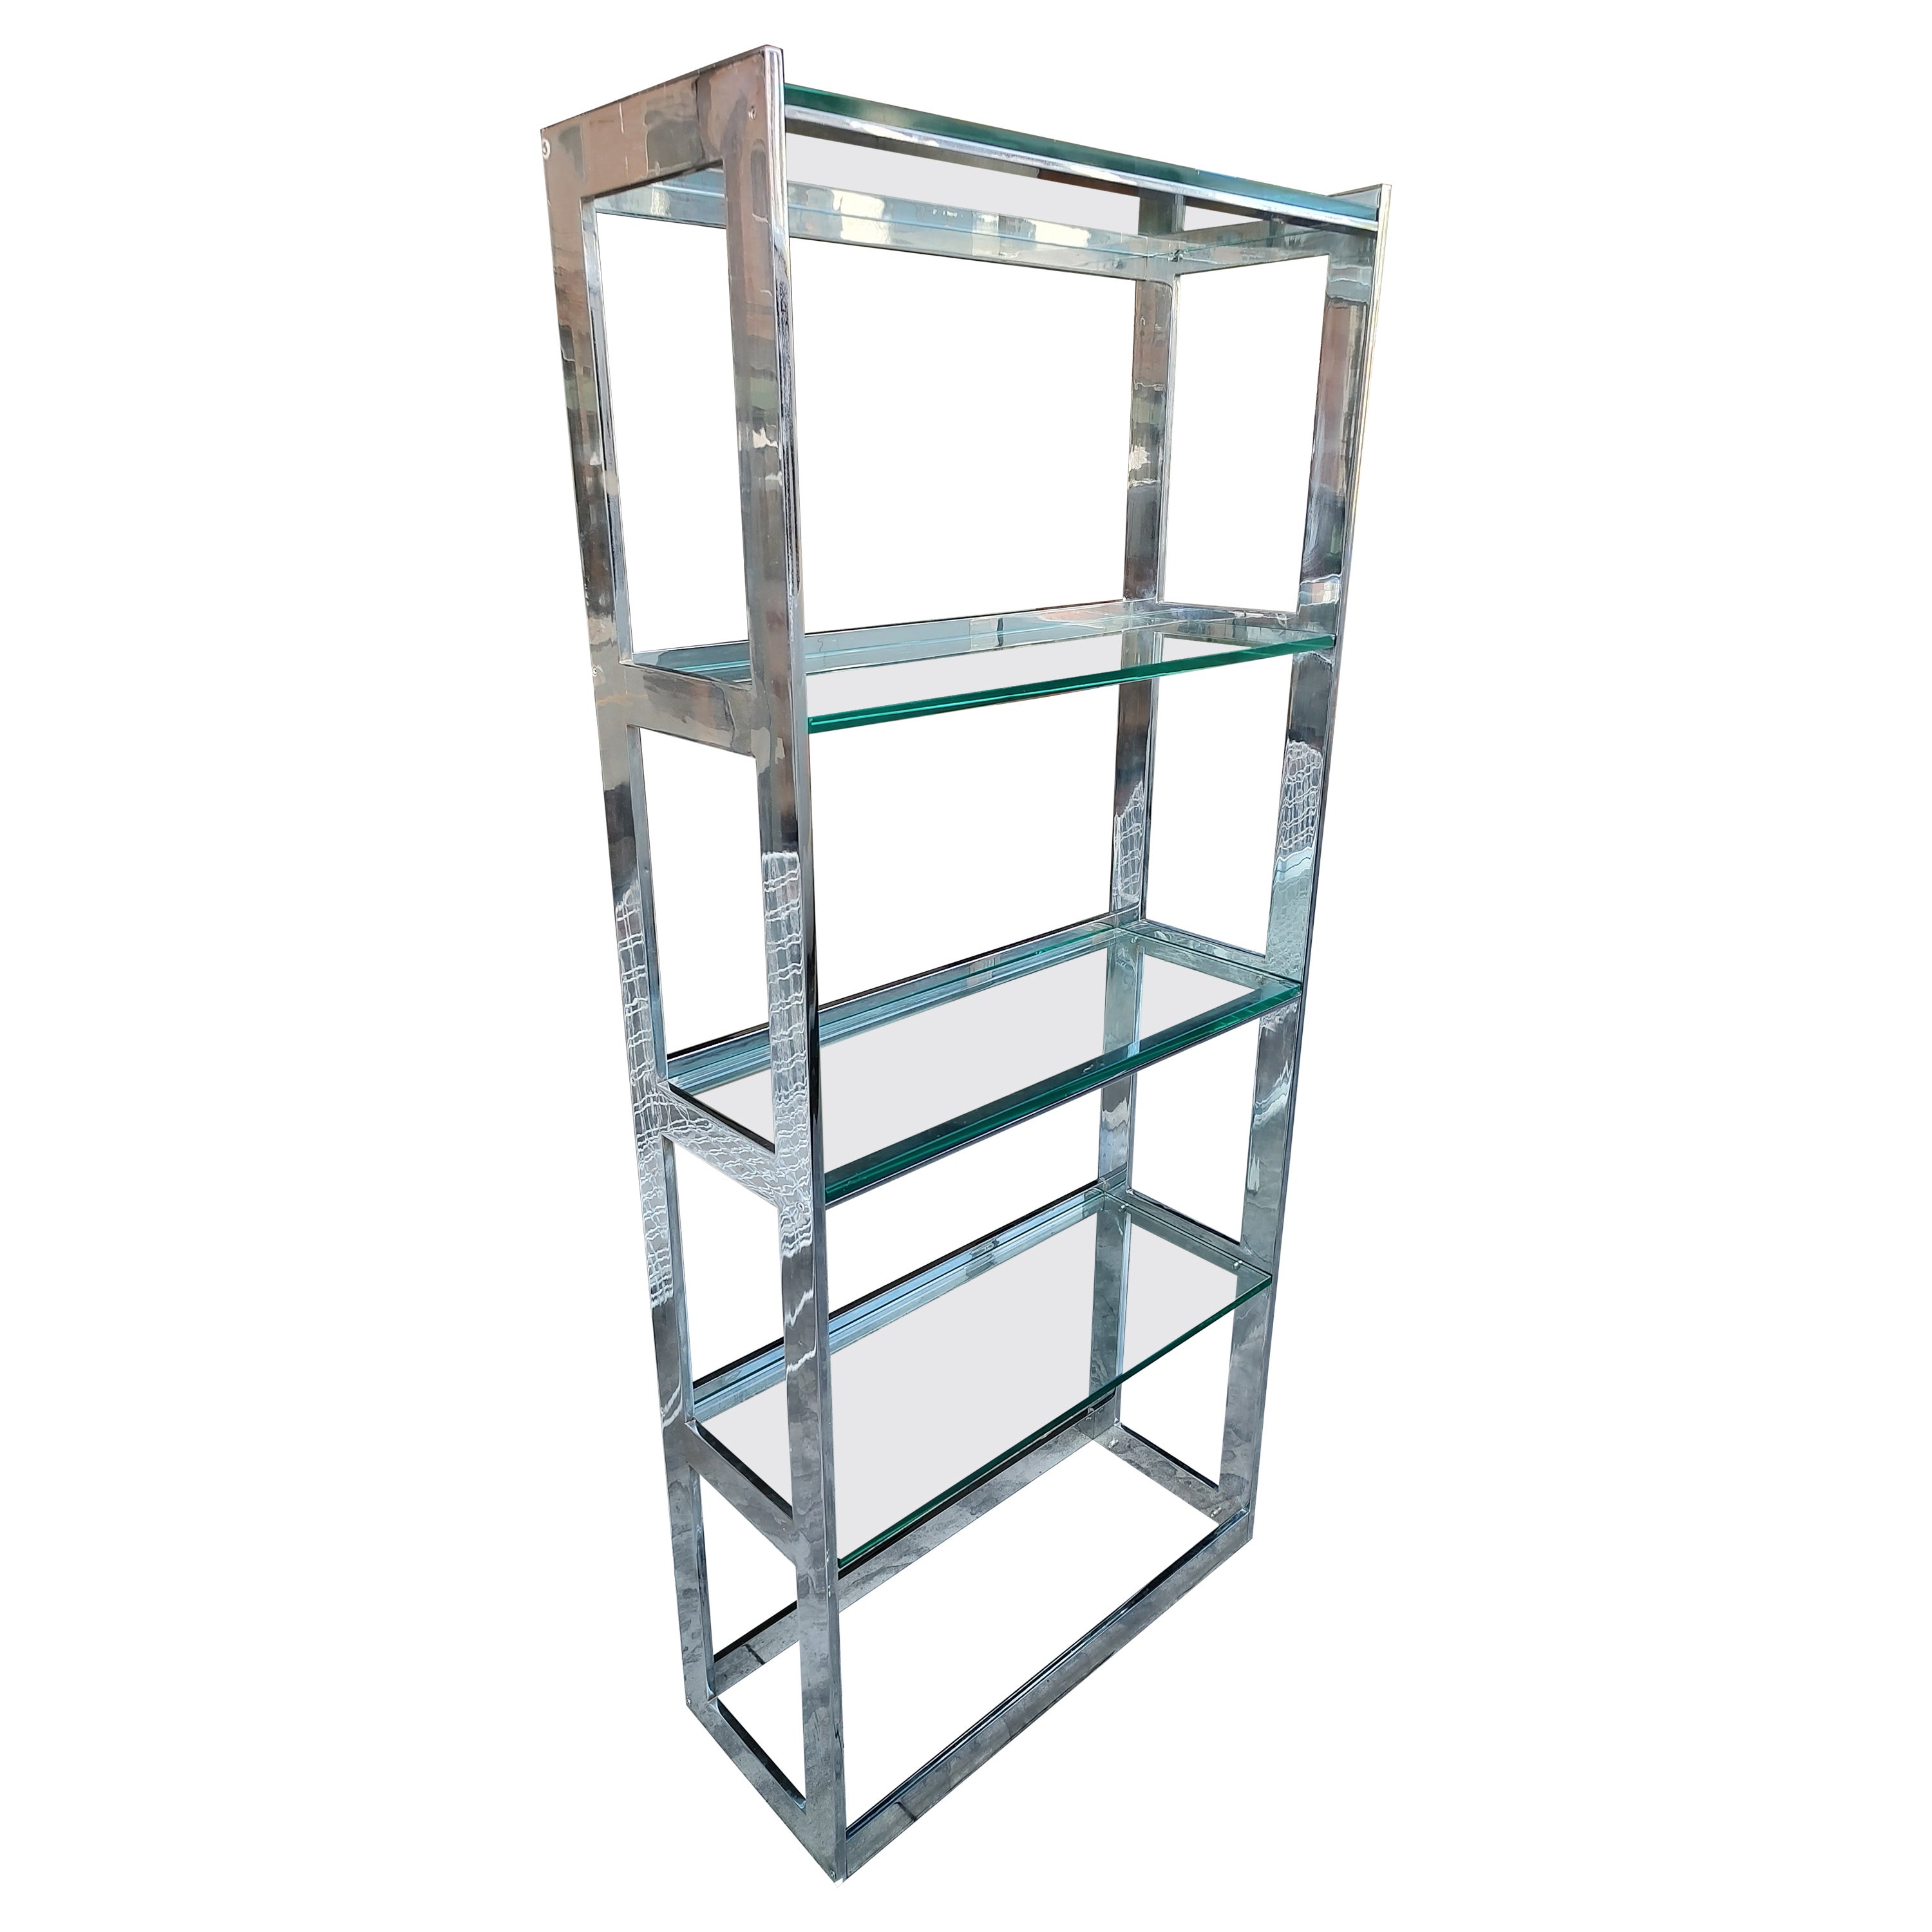 Pair of Mid-Century Modern Brutalist Etageres Shelving Units Flat Chrome & Glass In Good Condition For Sale In Port Jervis, NY